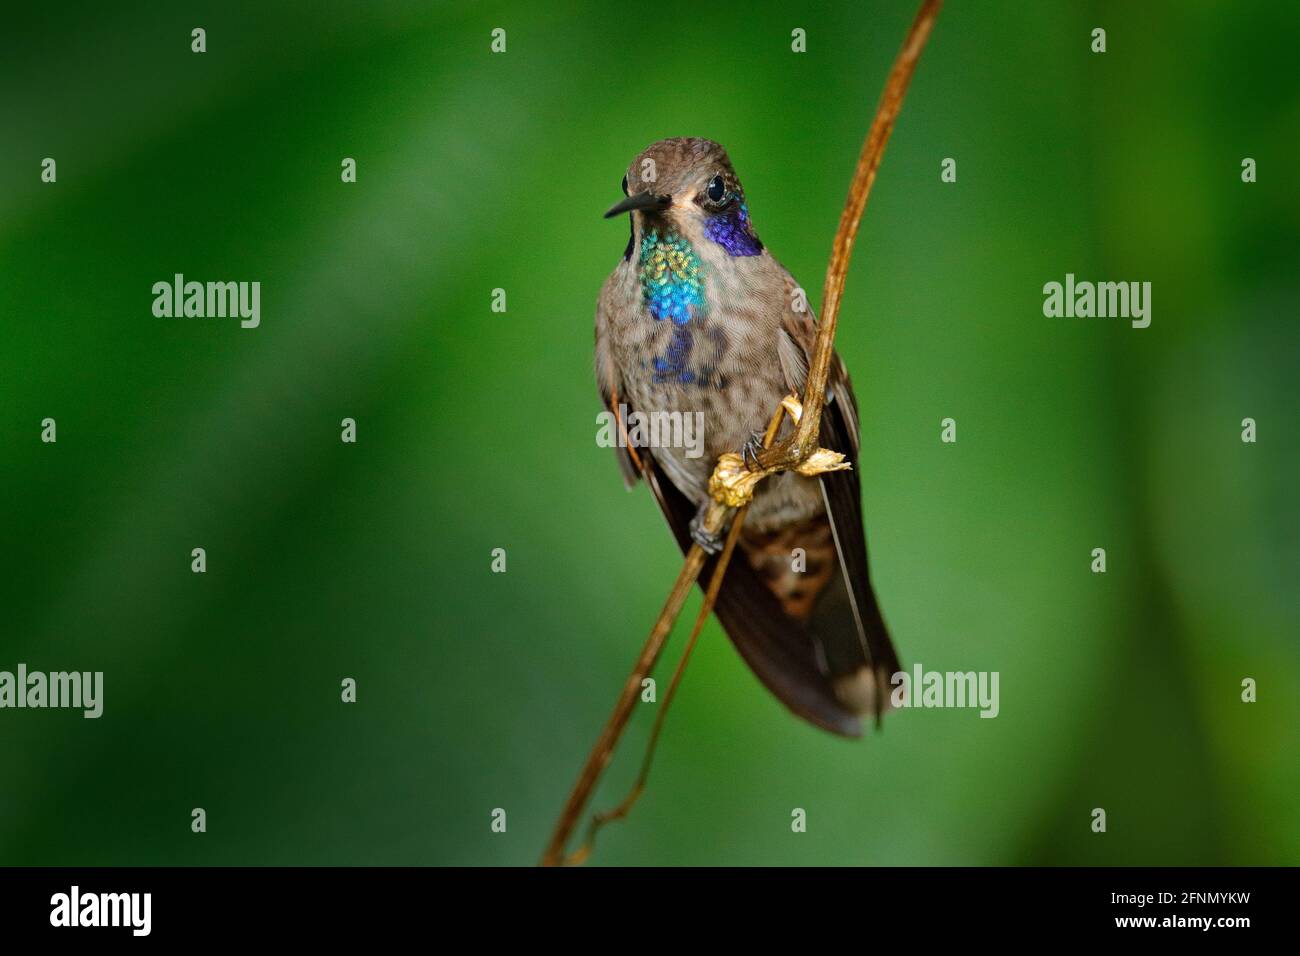 Bird with blue  cheeks. Wildlife scene from Ecuador. Bird in nature. Hummingbirds Brown Violet-ear, sitting on the branch, nice flowered green backgro Stock Photo